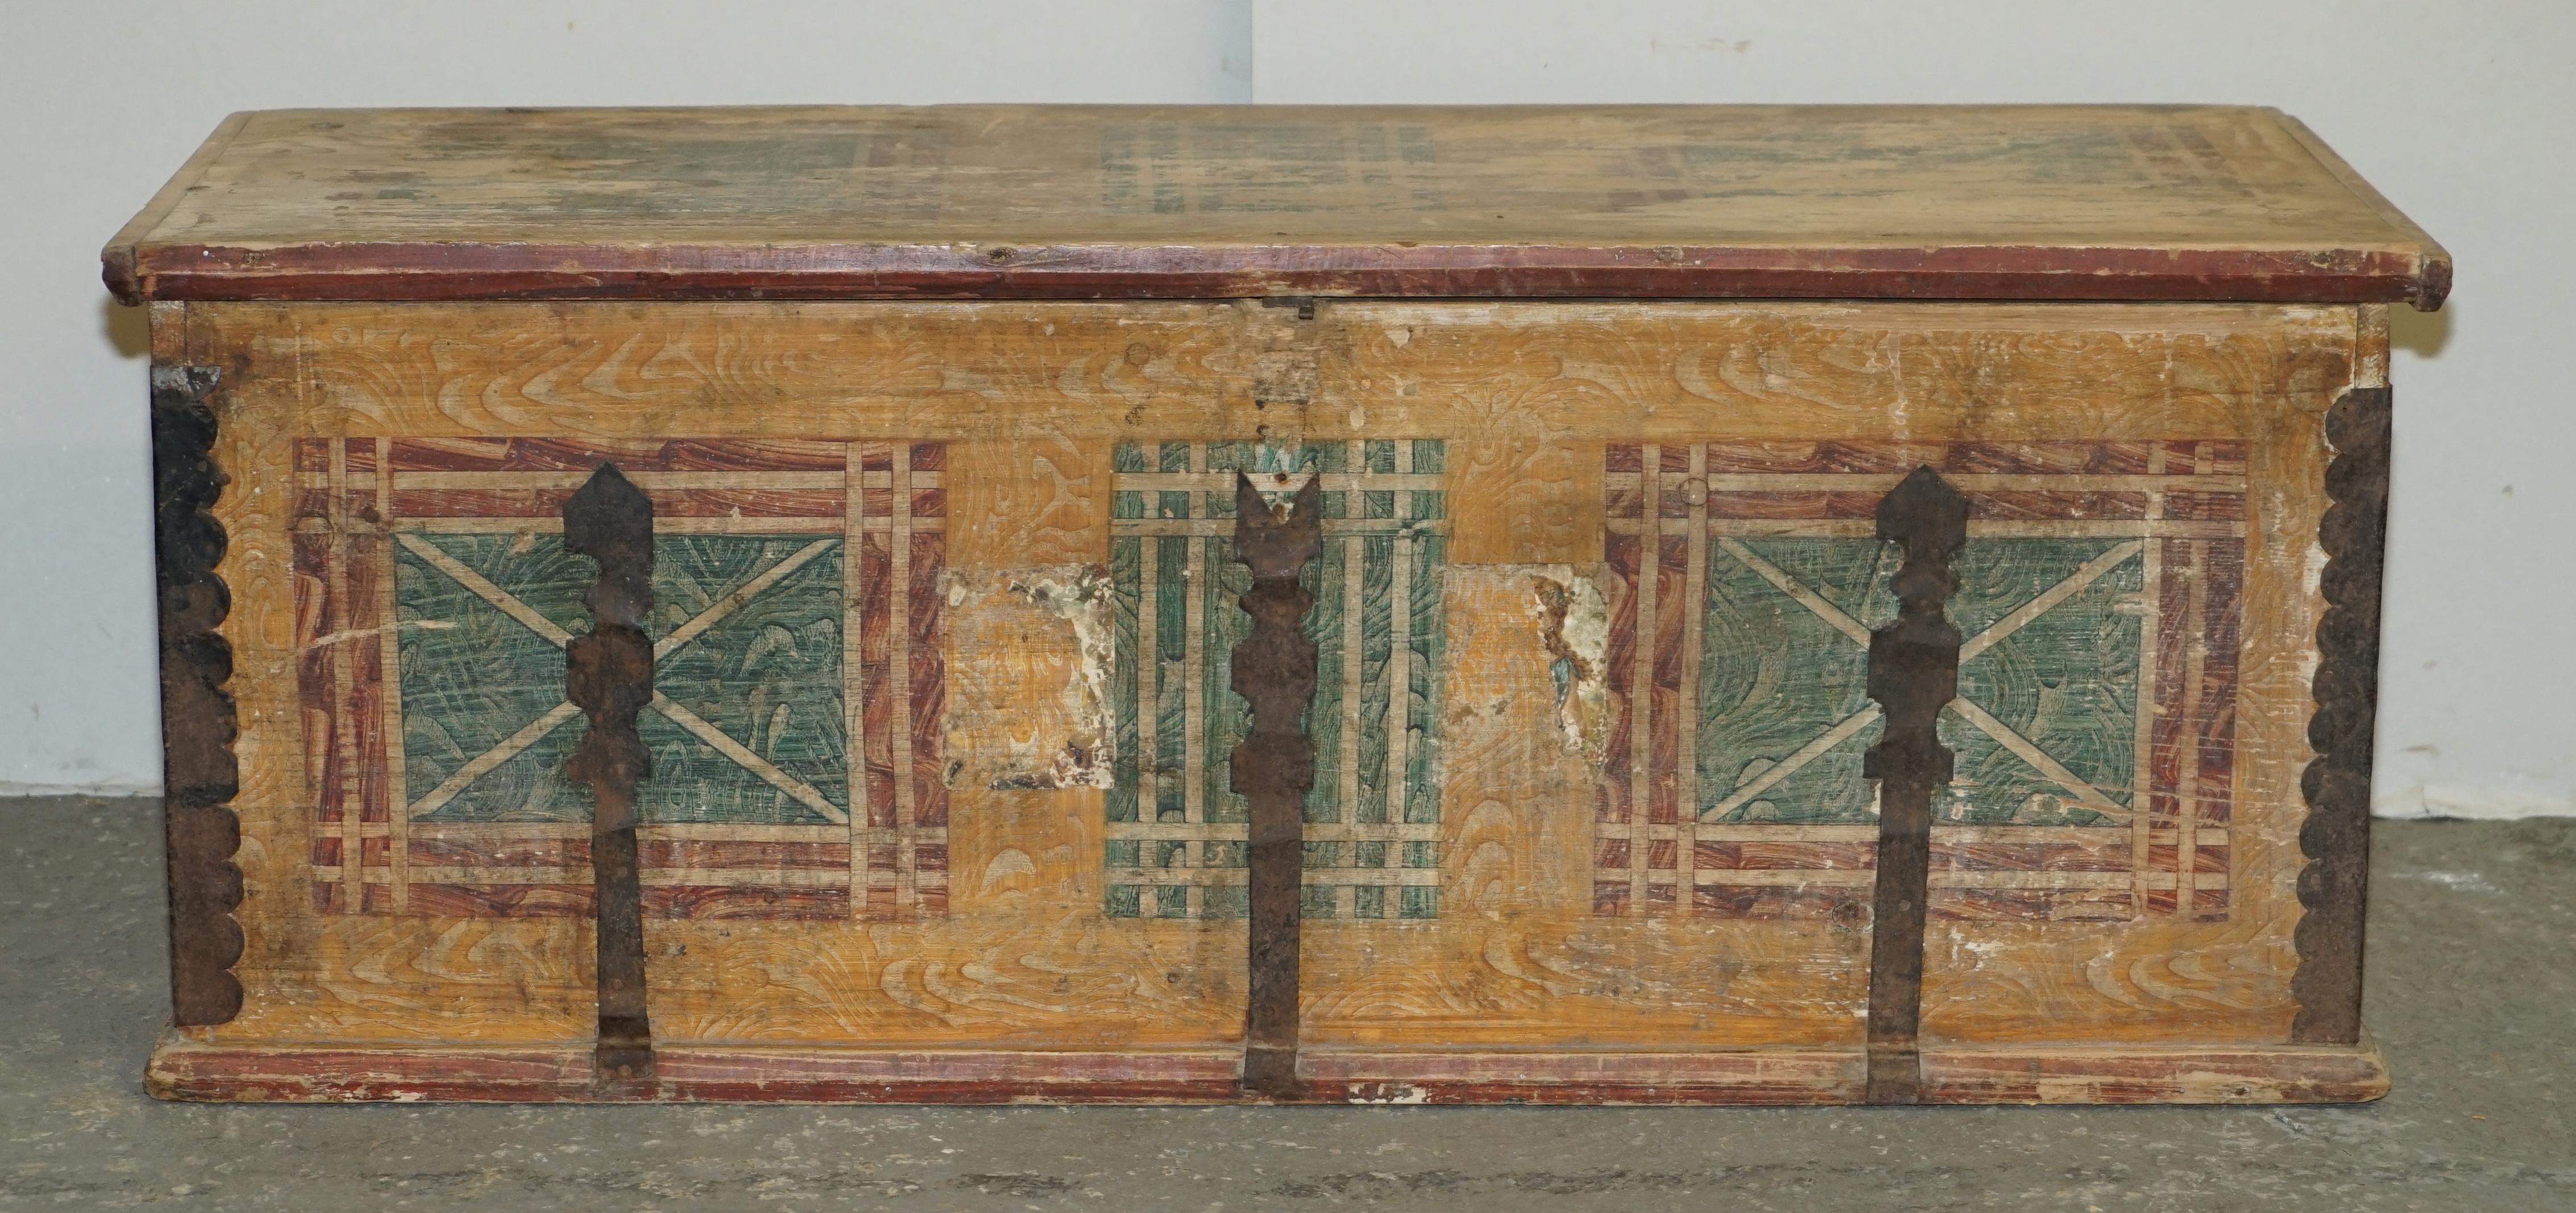 We are delighted to offer for sale this stunning, circa 1880 hand painted Romanian clothes trunk or marriage coffer chest

I have recently purchased a very large collection of these original, antique painted wardrobes and trunks, I have around 15